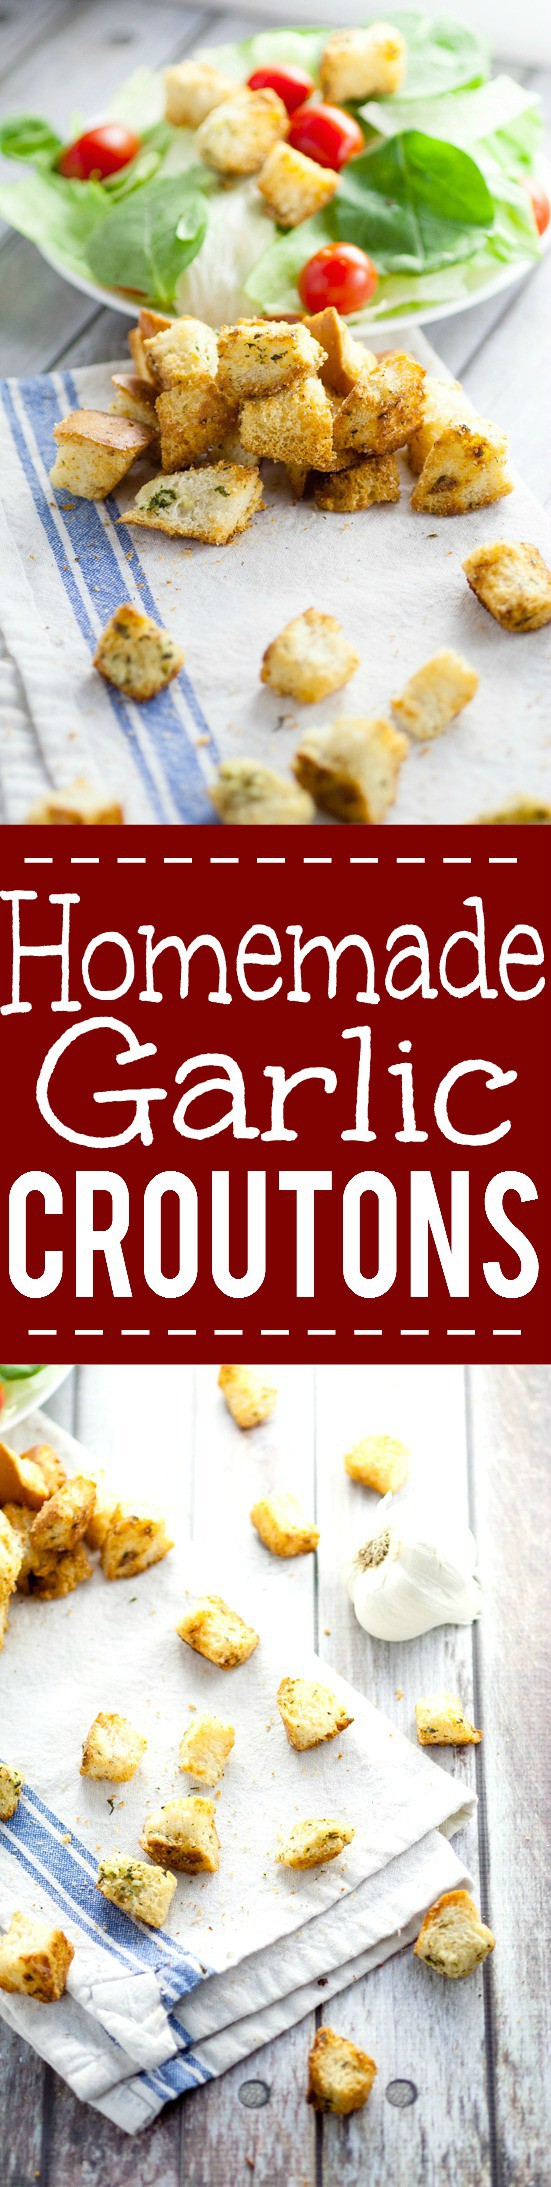 Homemade Garlic Croutons recipe - Skip the store bought croutons and make this crunchy, buttery, and zesty Homemade Garlic Croutons recipe for the perfect delicious topping on your favorite salad! These look so good. 